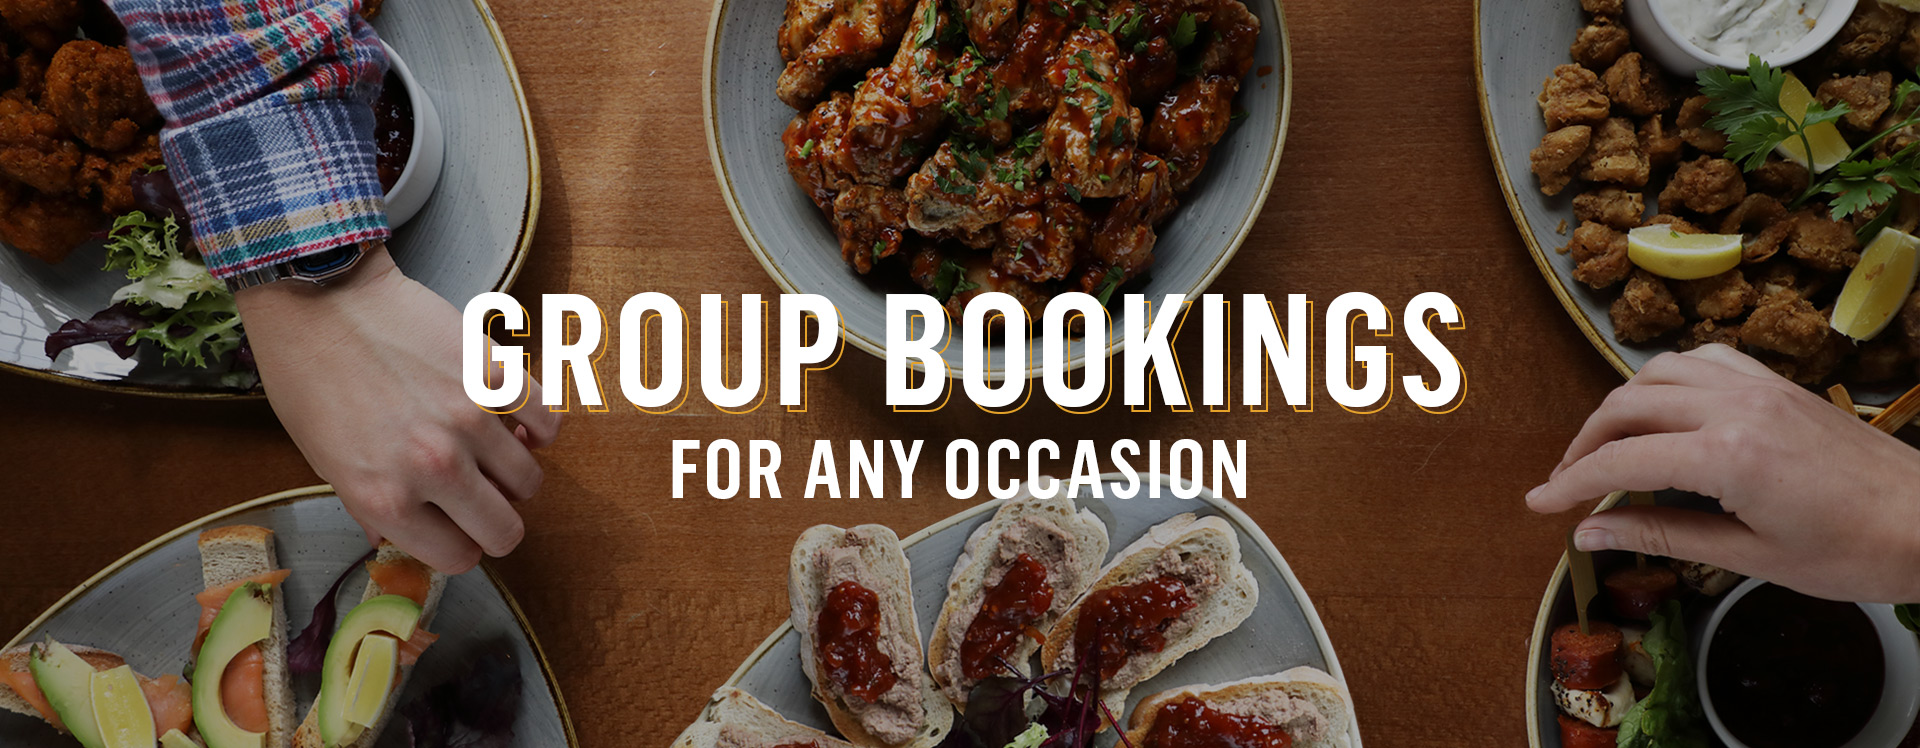 Group Bookings at Williamson's Tavern